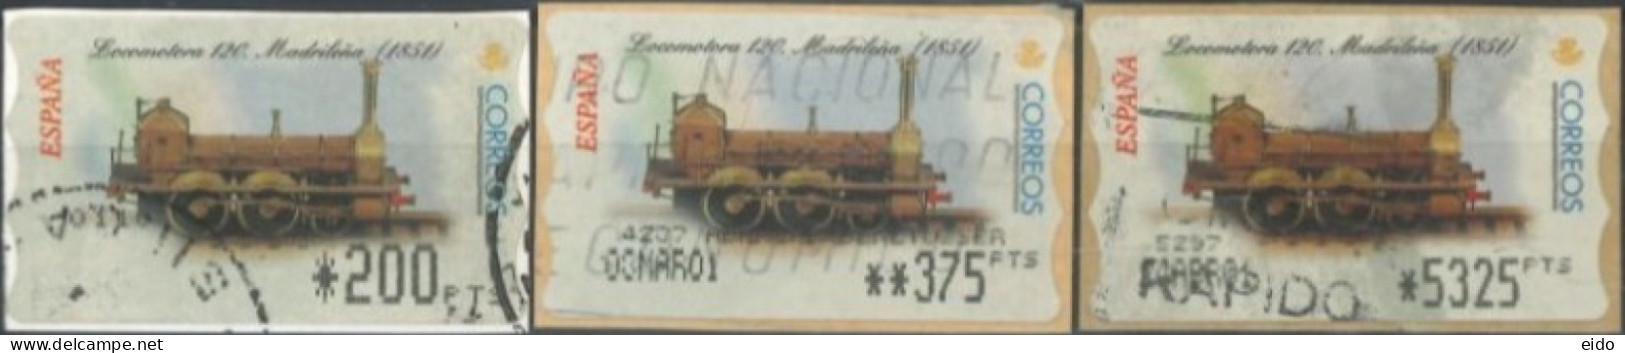 SPAIN- 2001, LOCOMOTIVES STAMPS LABELS SET OF 3, DIFFERENT VALUES, USED. - Used Stamps